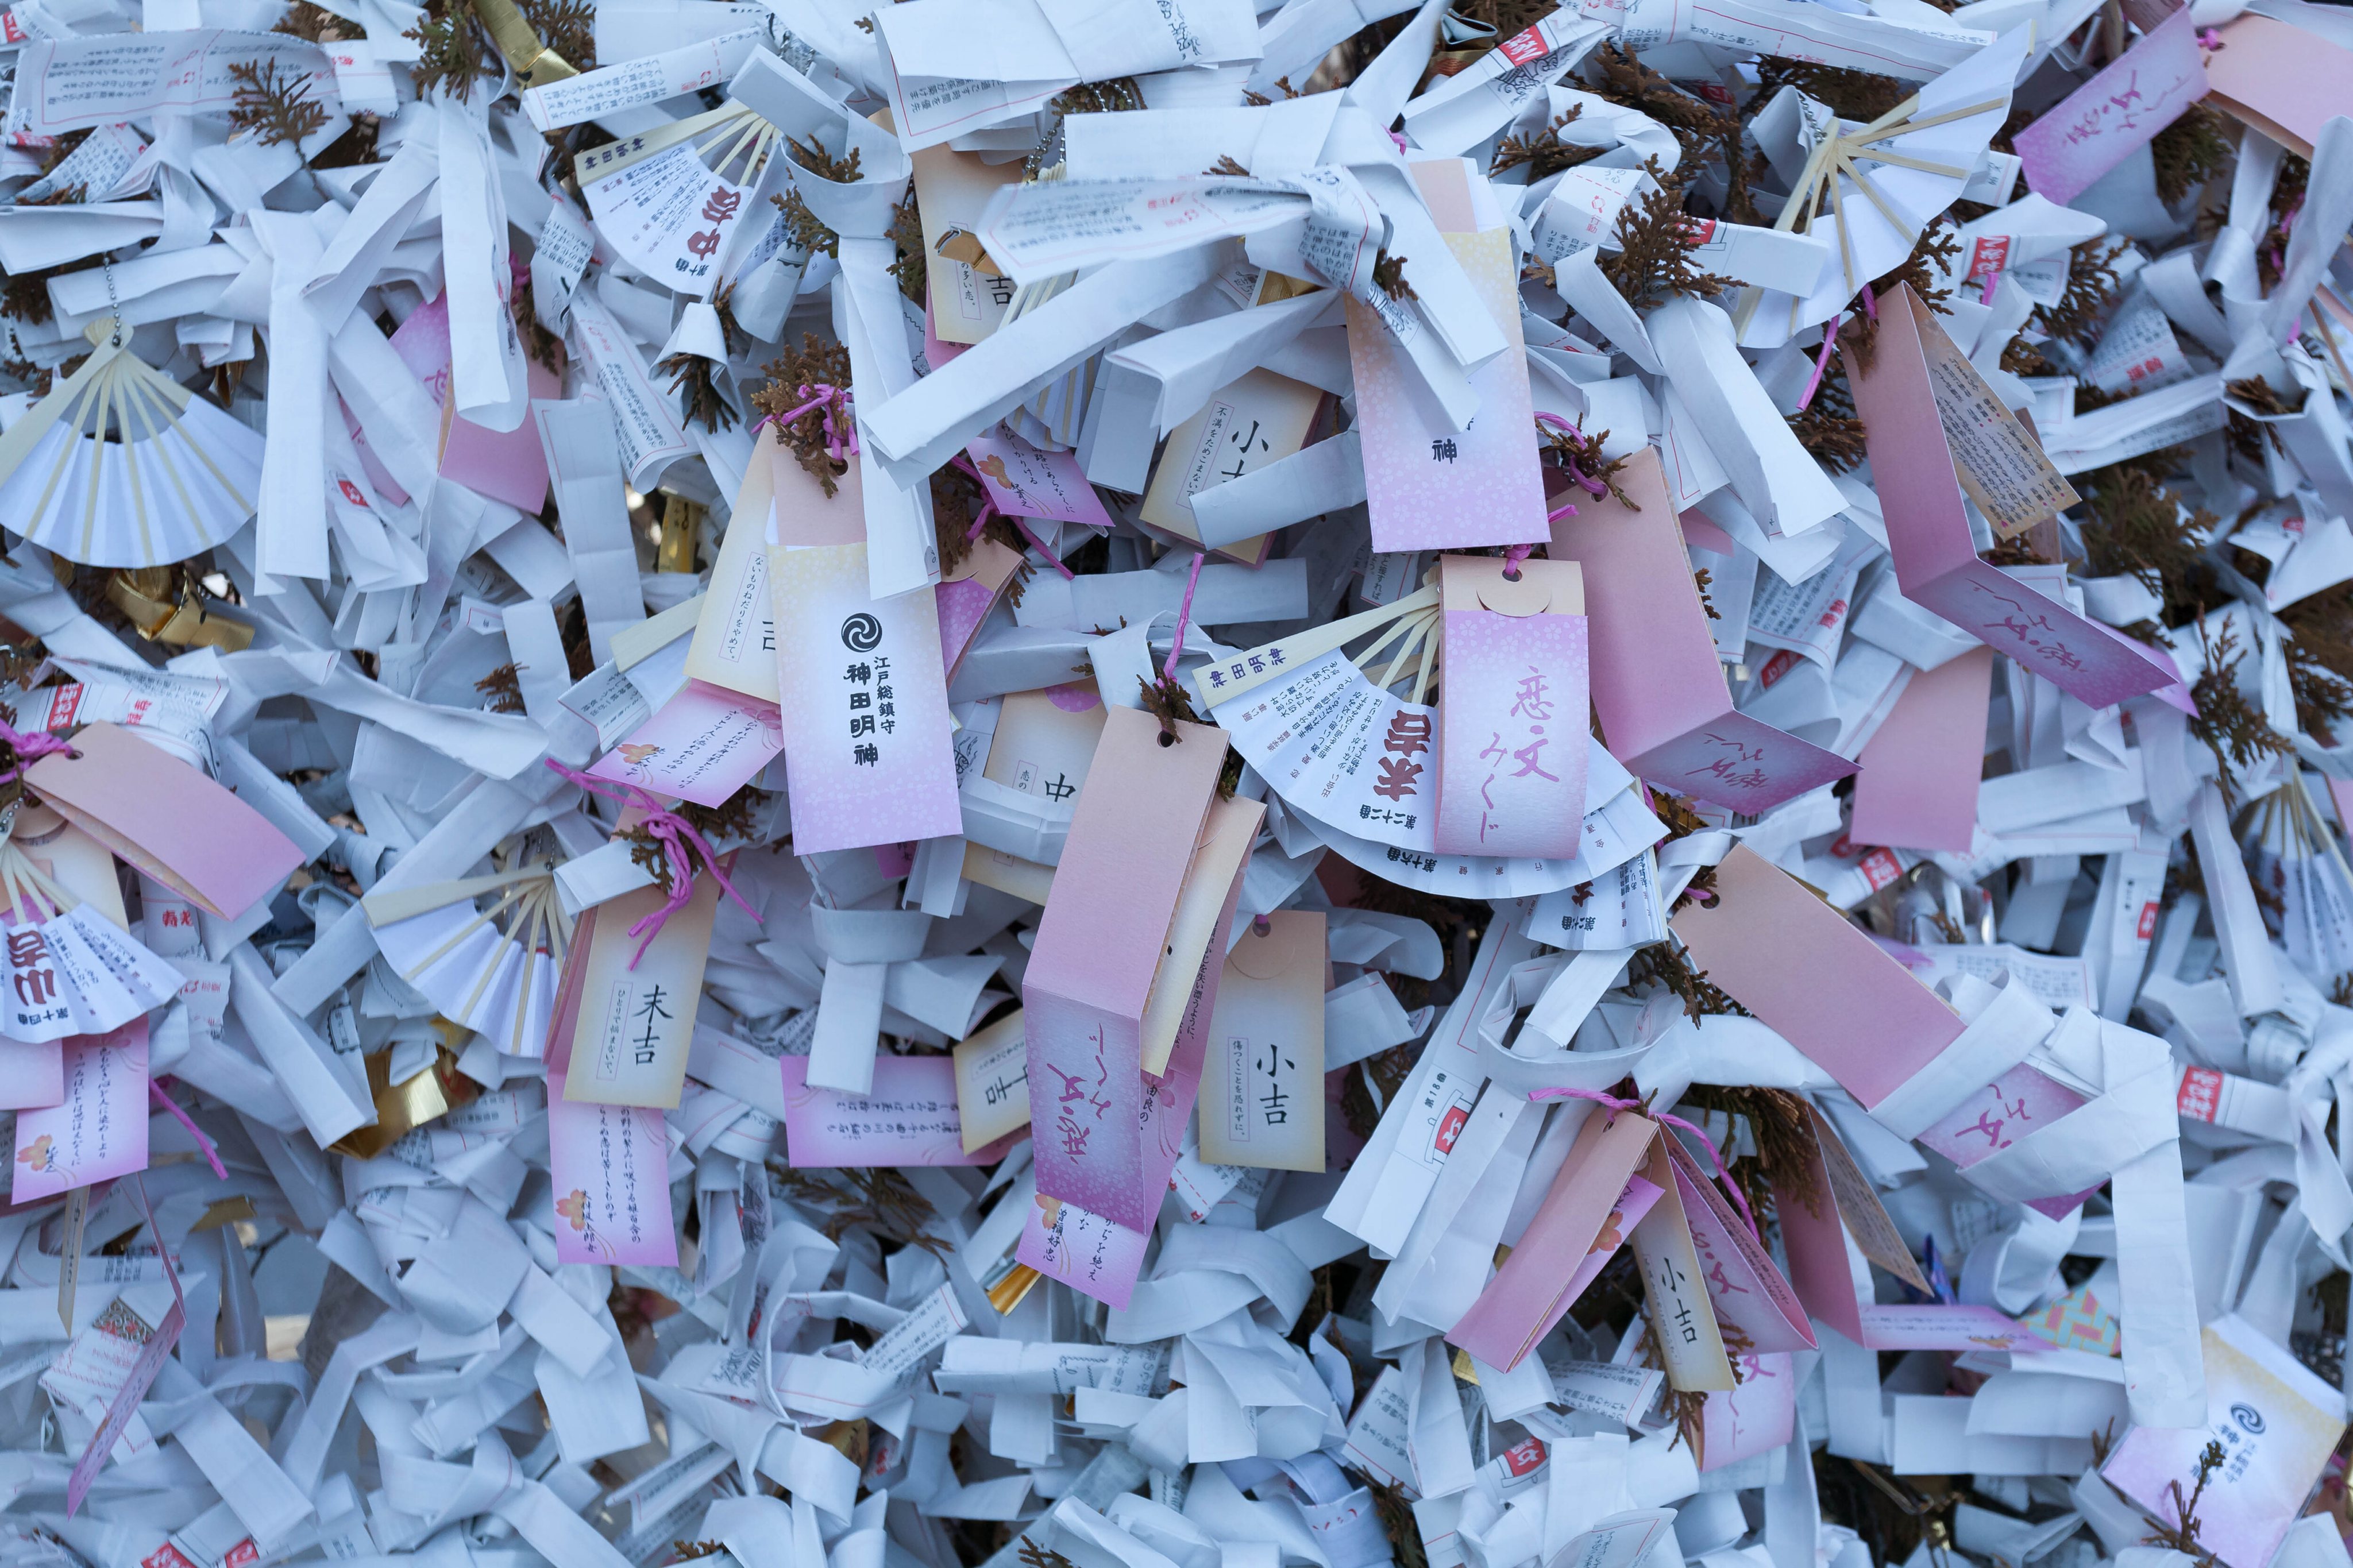 Fortune papers, called omikuji, left by people visiting